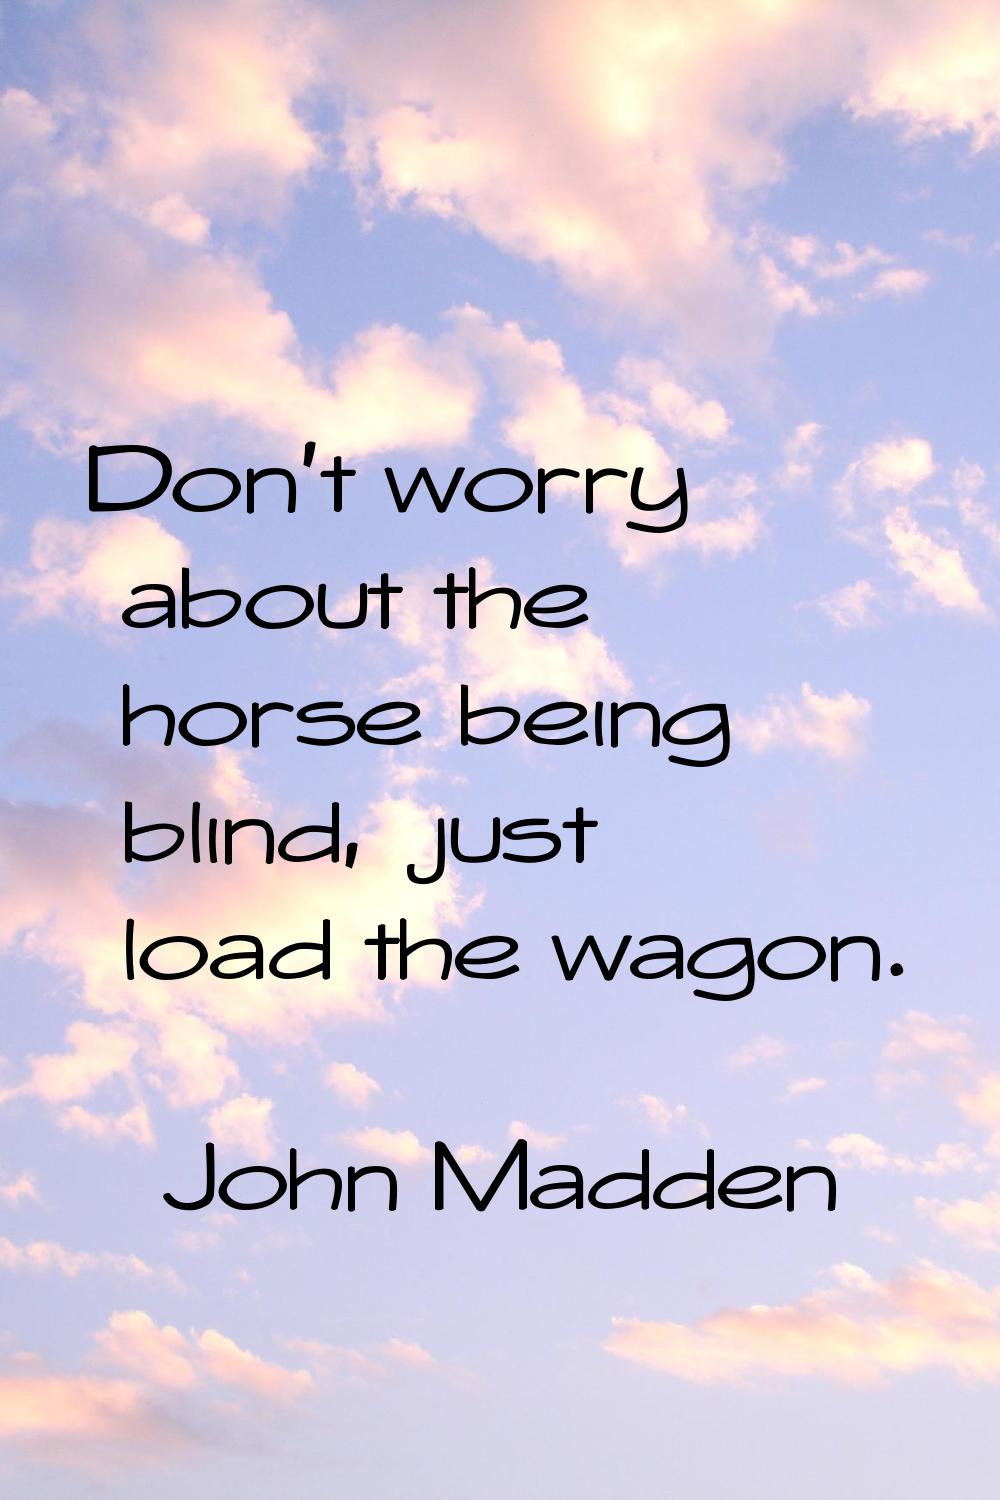 Don't worry about the horse being blind, just load the wagon.